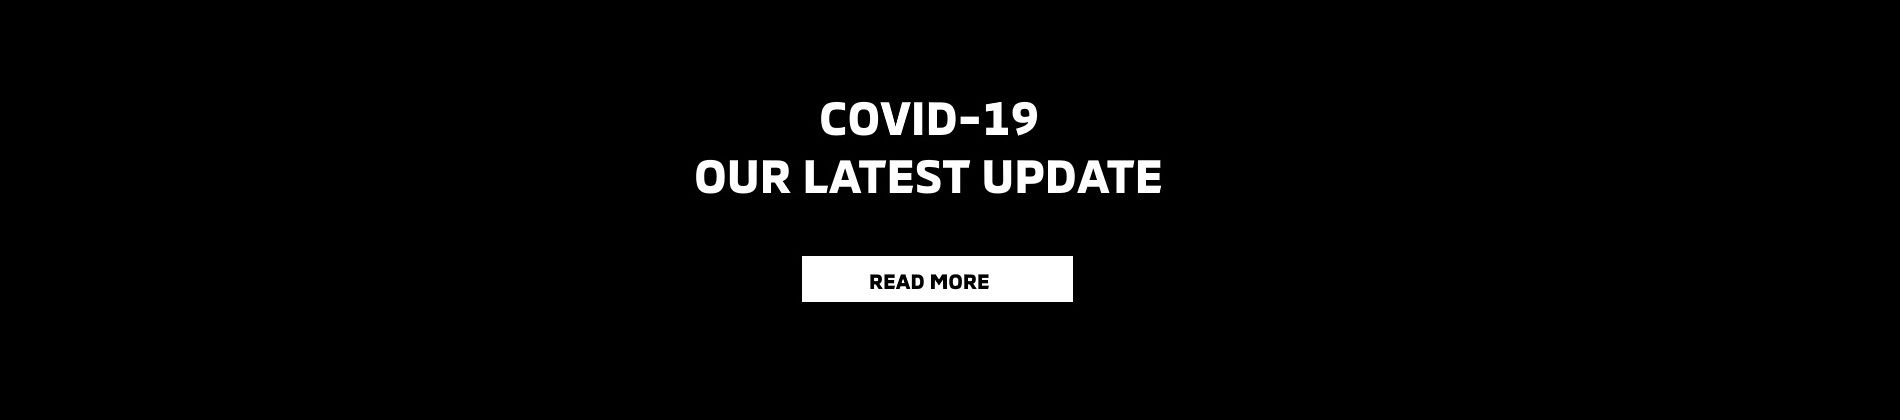 Important update about the COVID-19 situation